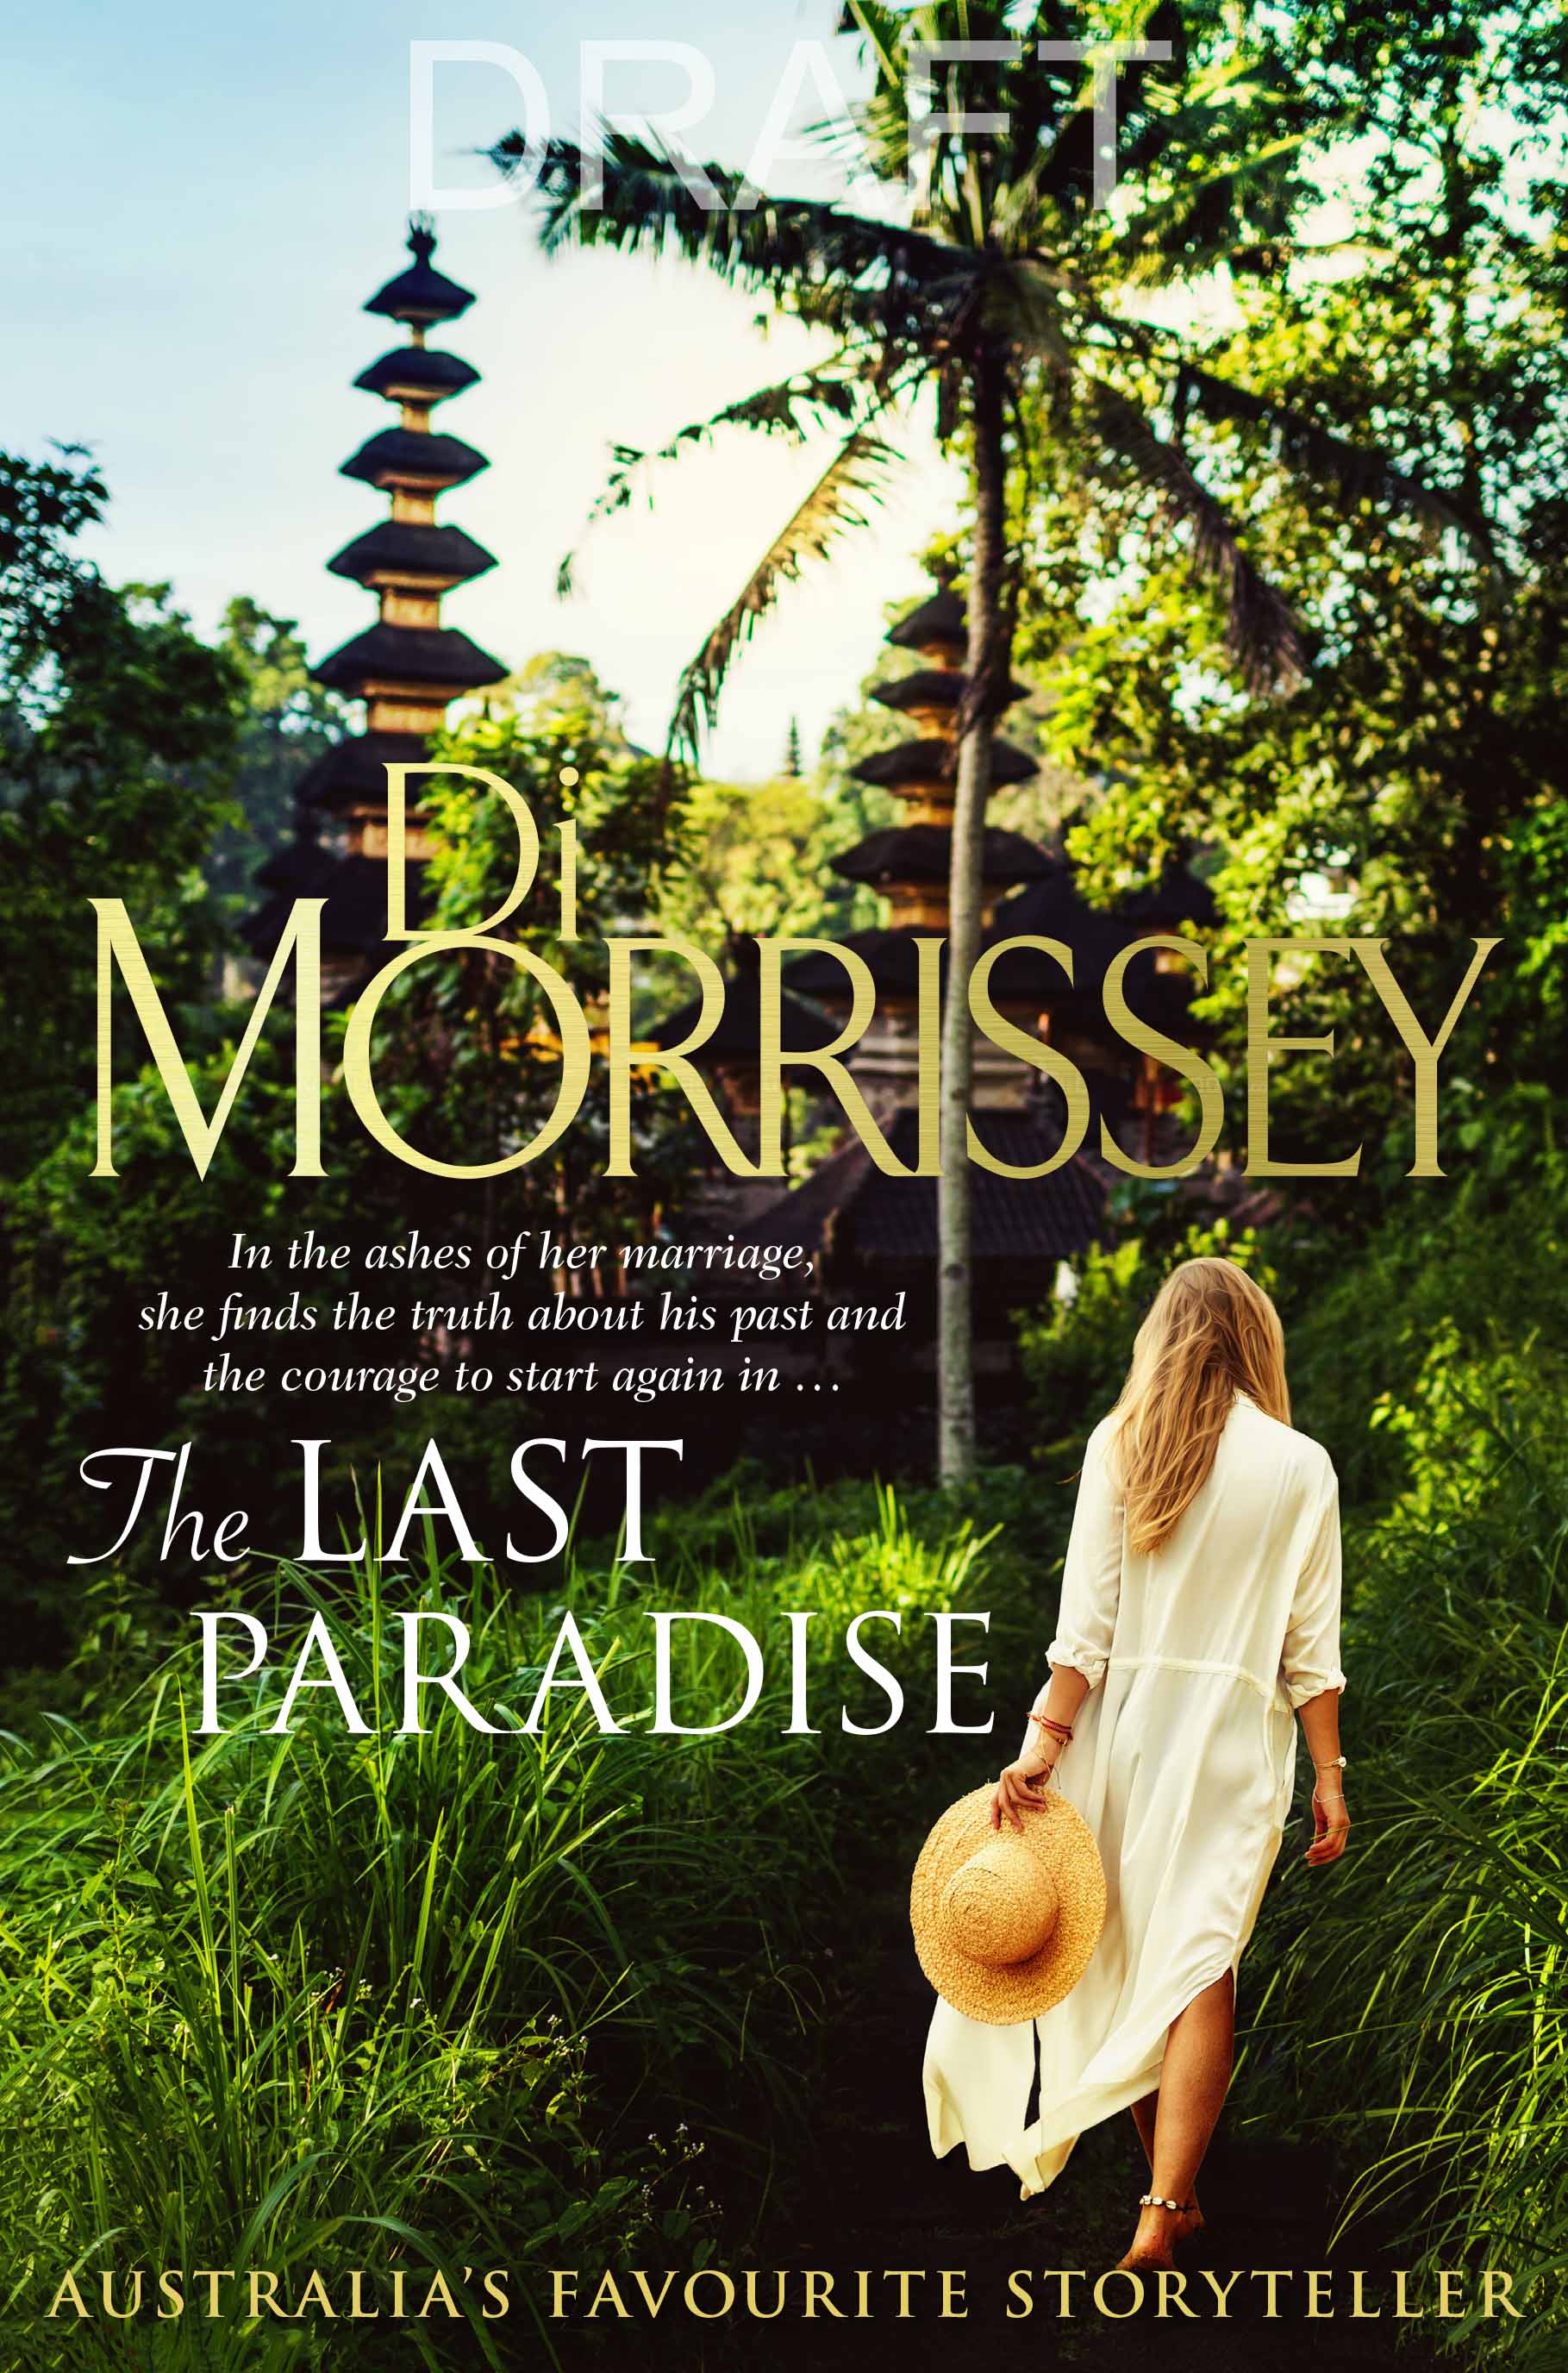  Introducing “The Last Paradise”